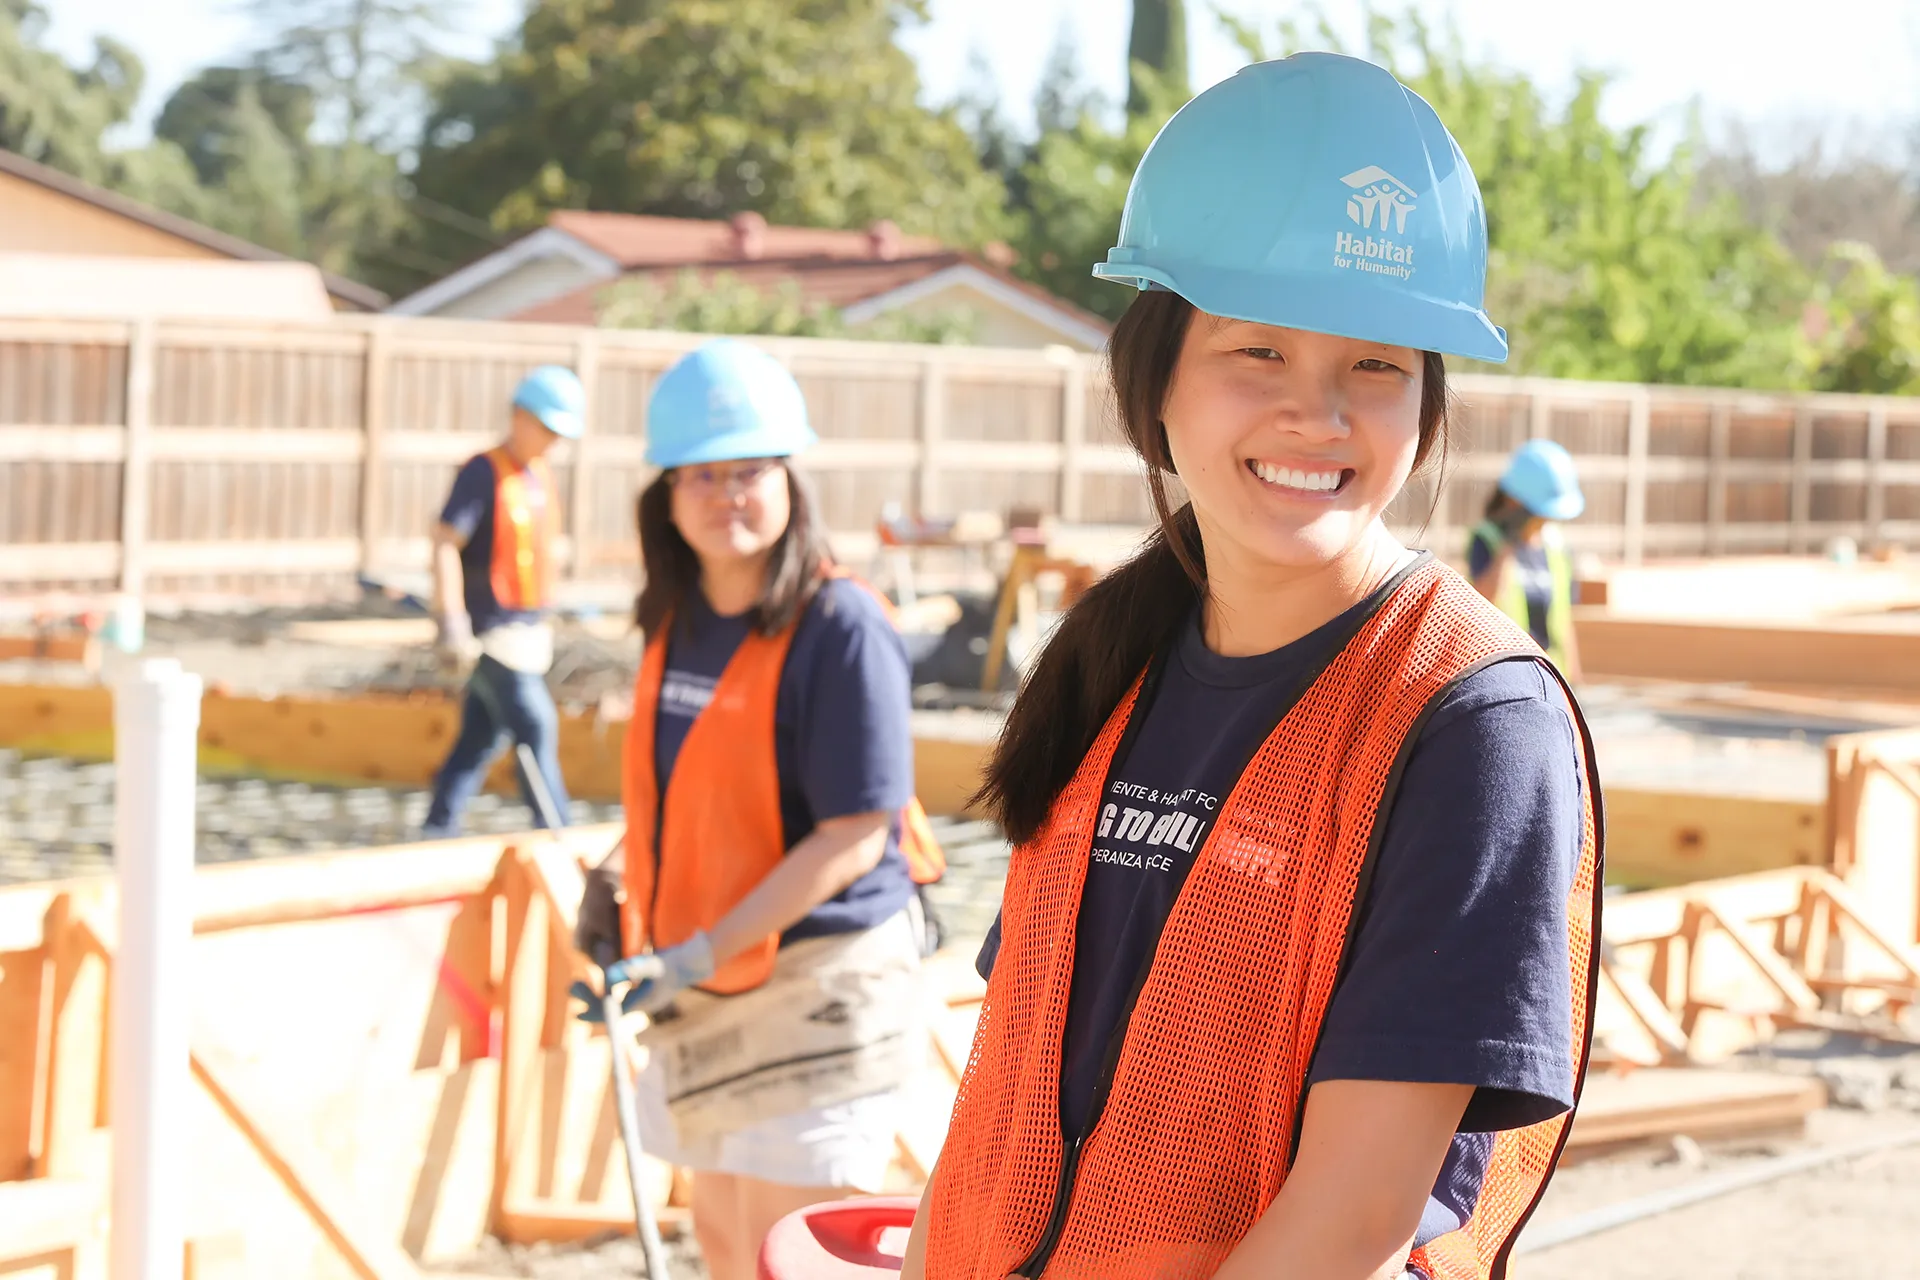 Volunteers smiling on construction site